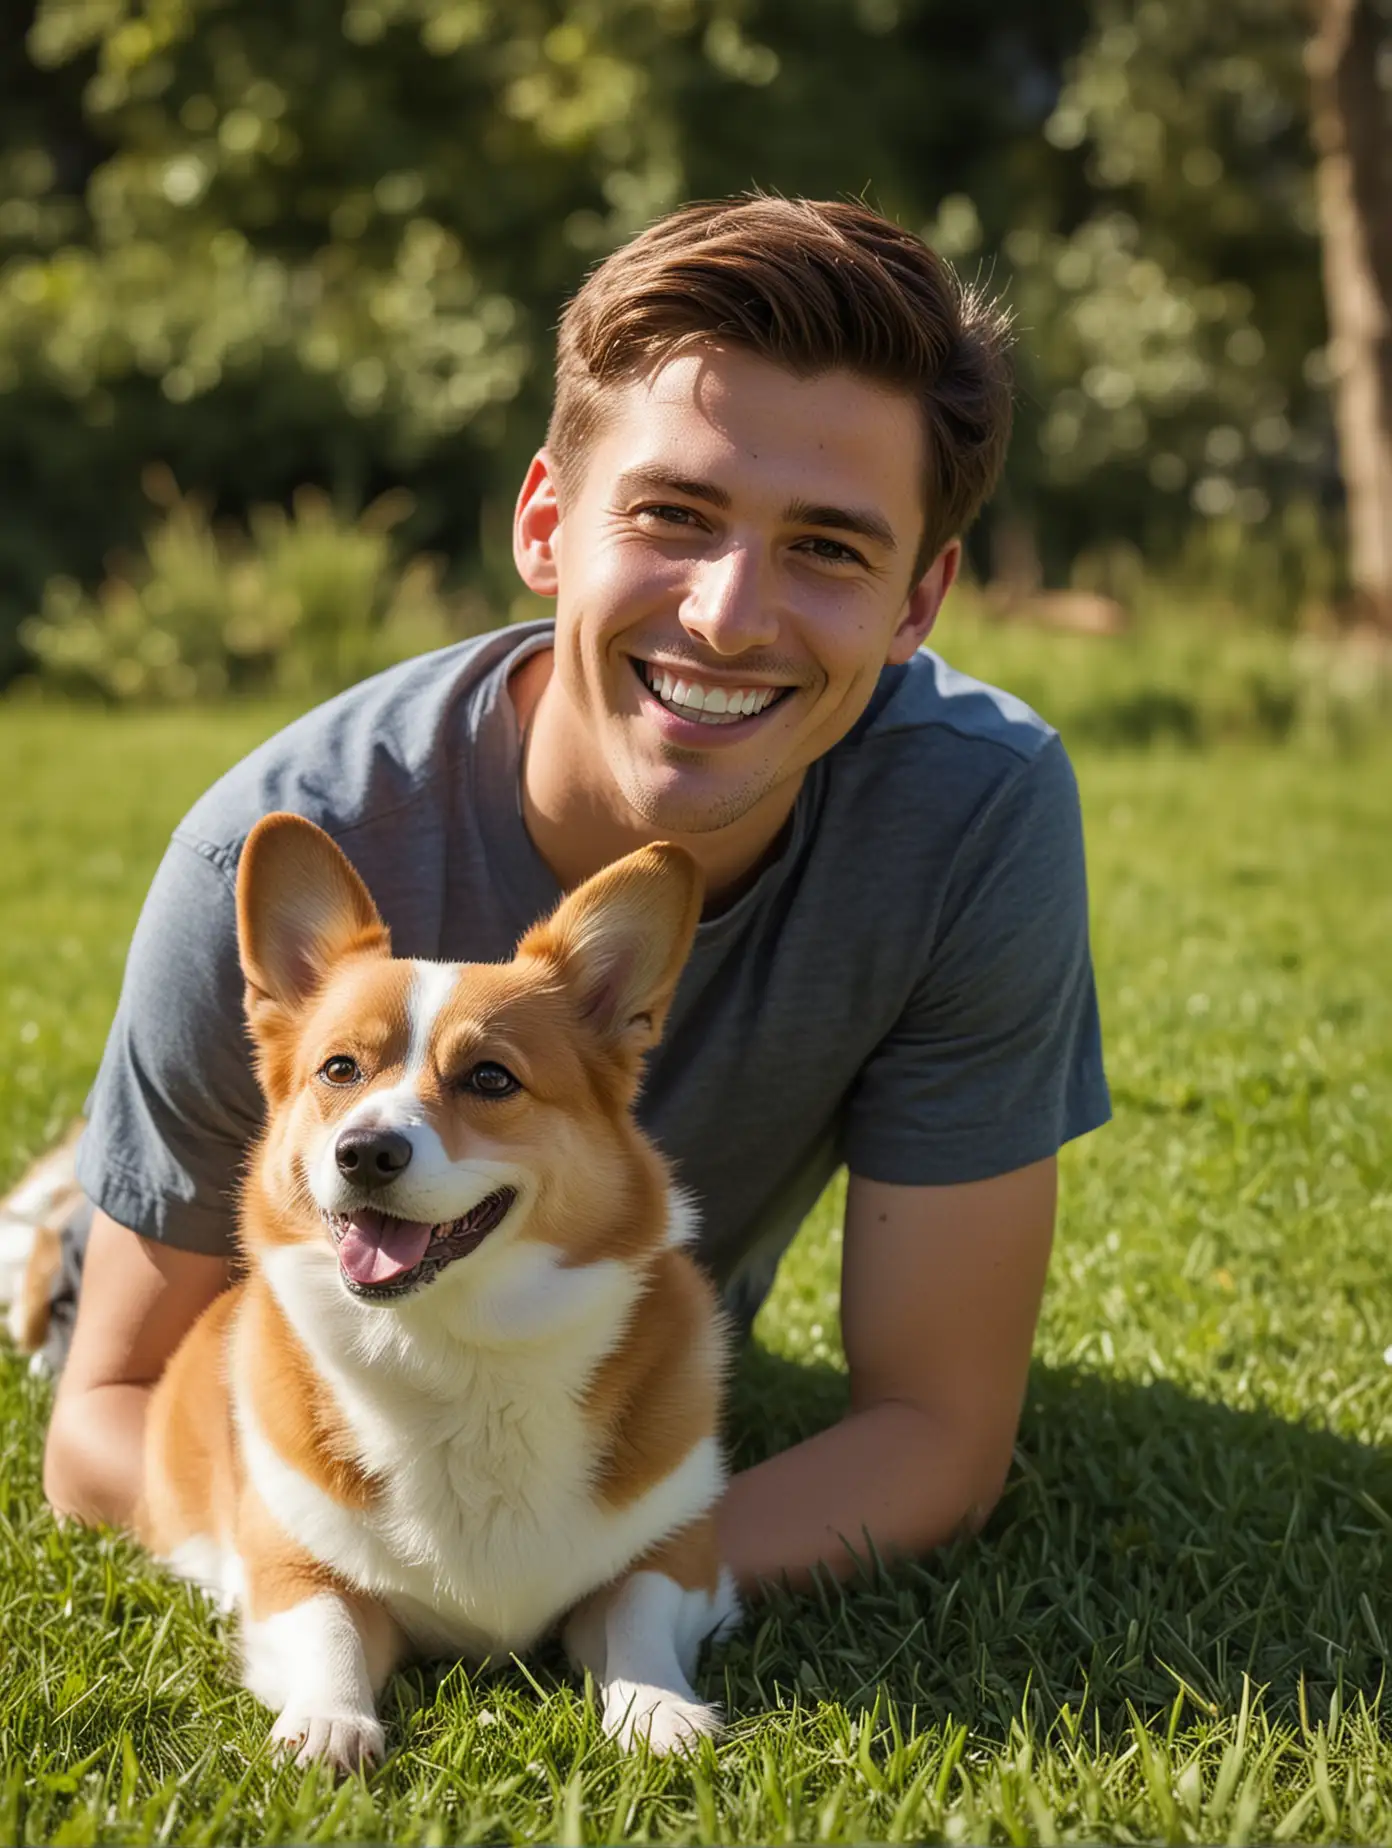 American, a handsome young man smiles for the camera and poses with a corgi dog, outdoors on the grass on a sunny day. This photo was shot Sony A7c style using a 35mm f/2 lens for a realistic look.